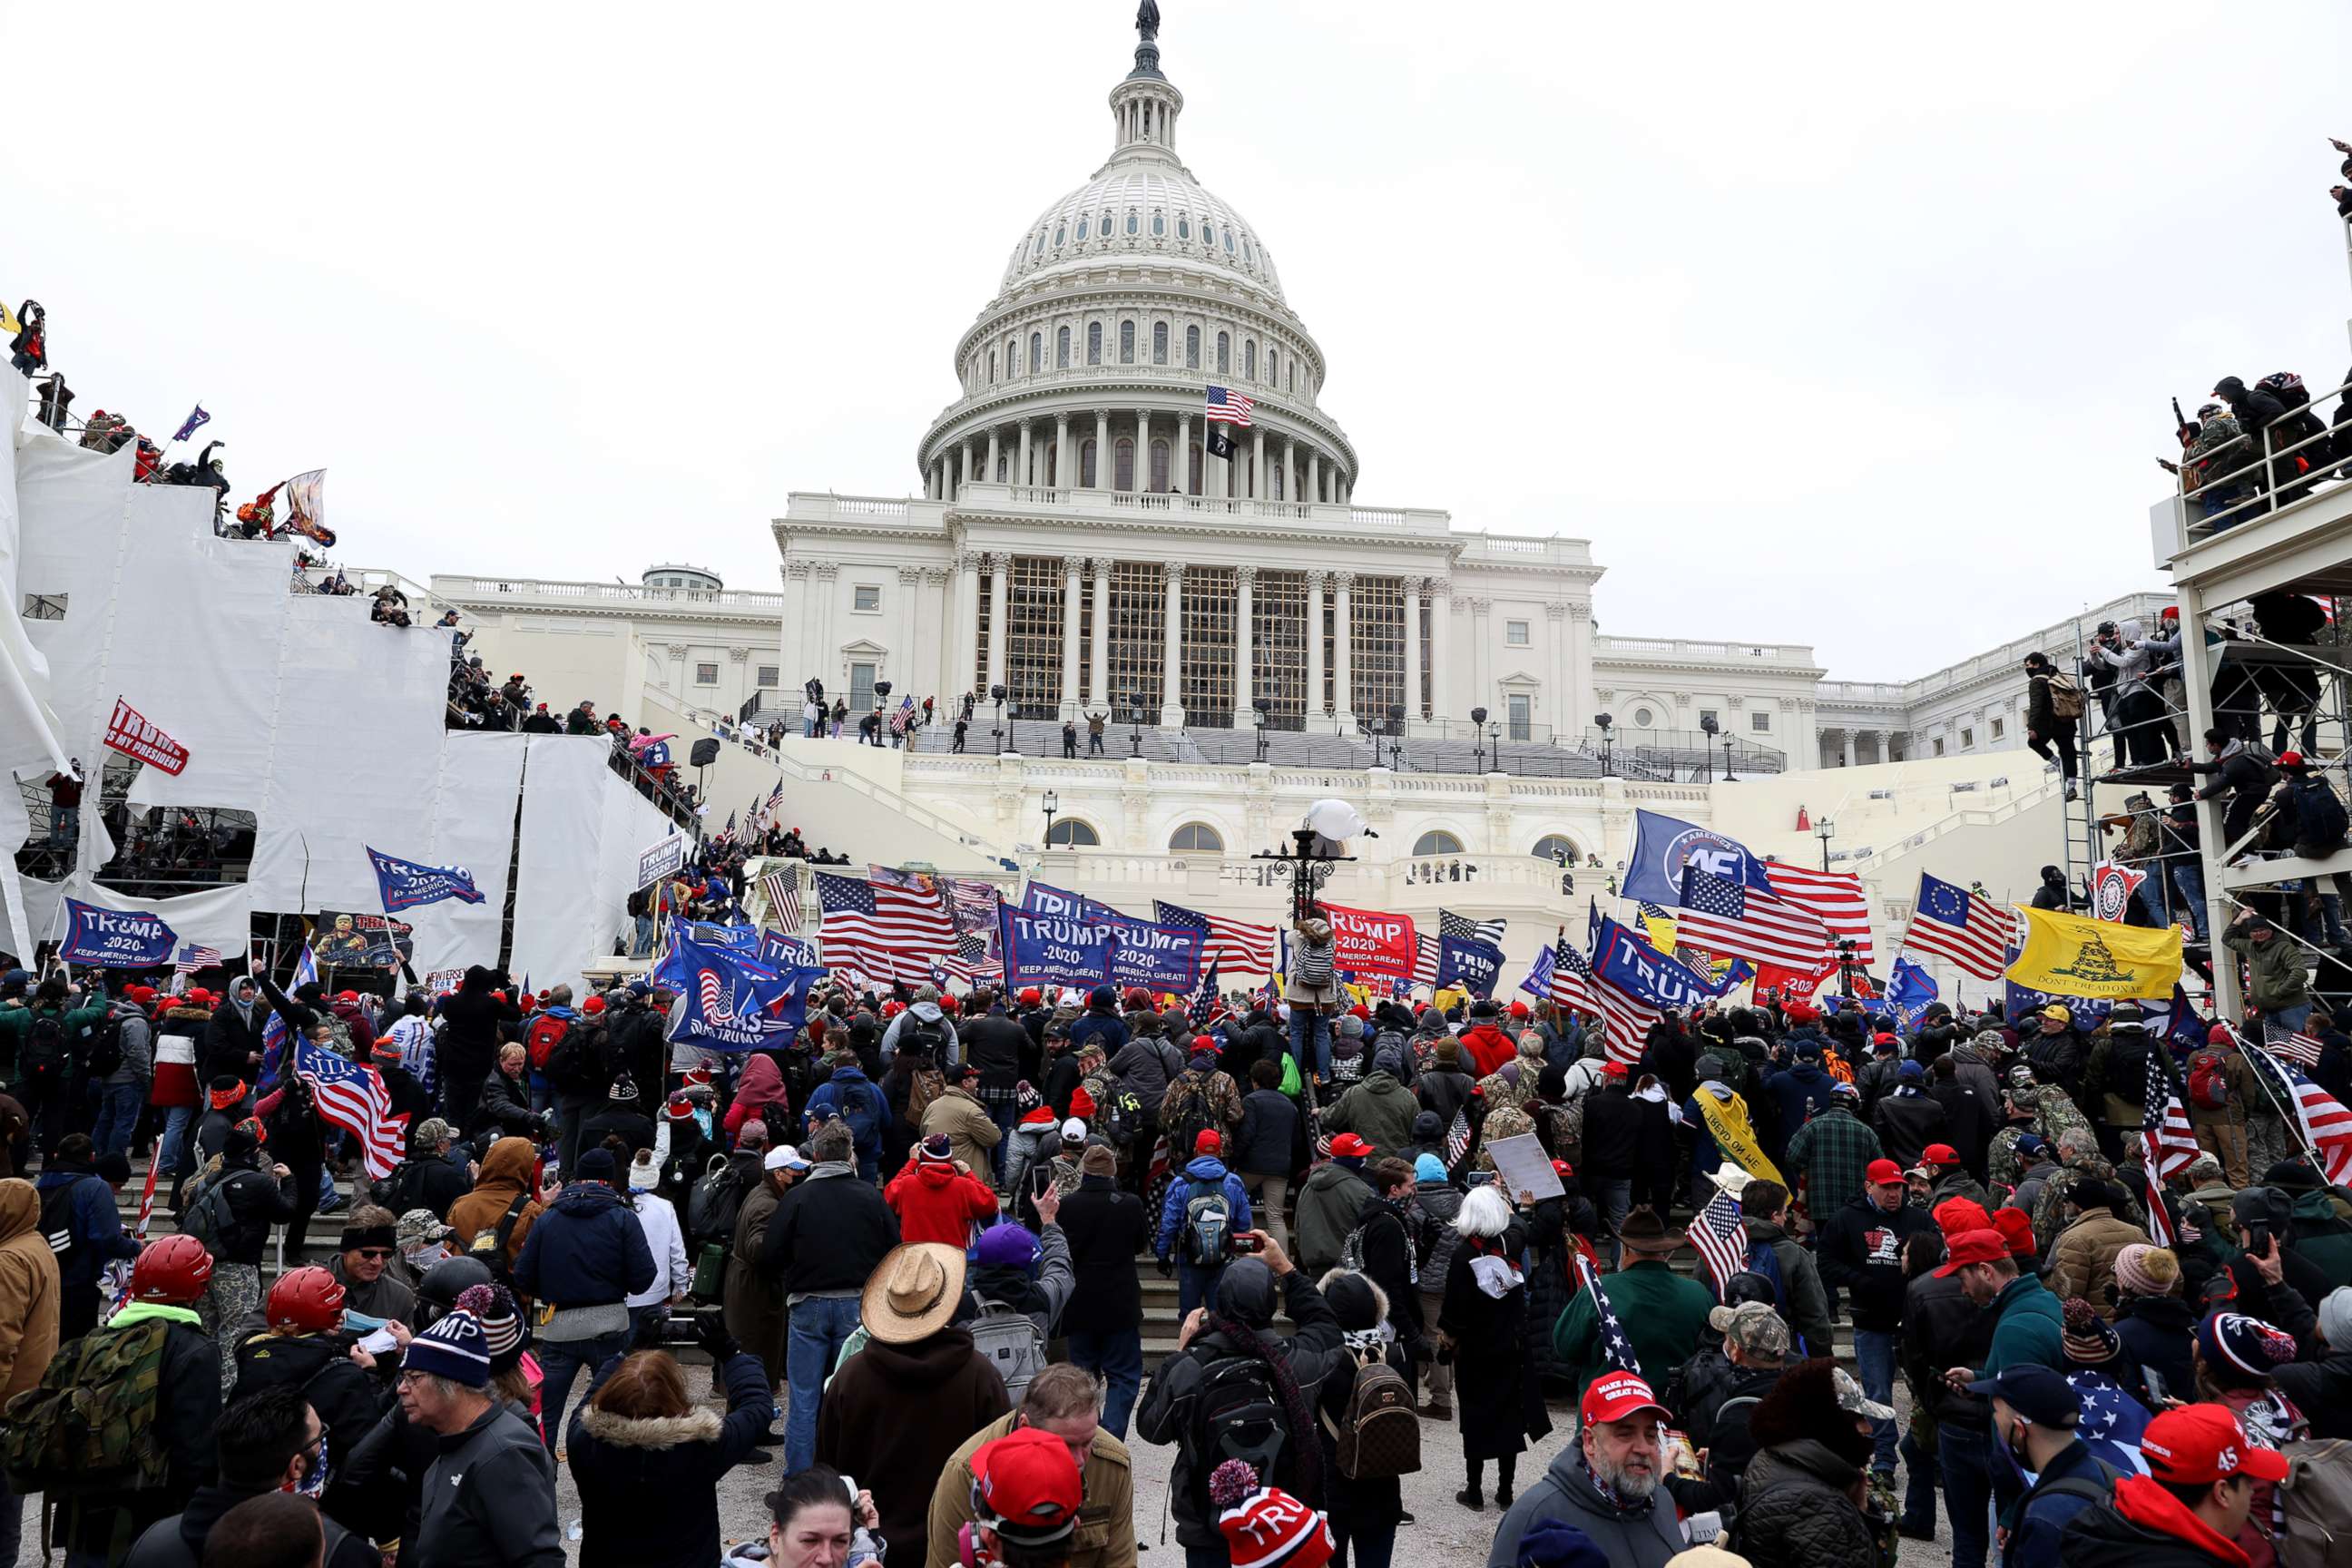 PHOTO: In this Jan. 6, 2021, file photo, protesters gather outside the U.S. Capitol Building in Washington, D.C.